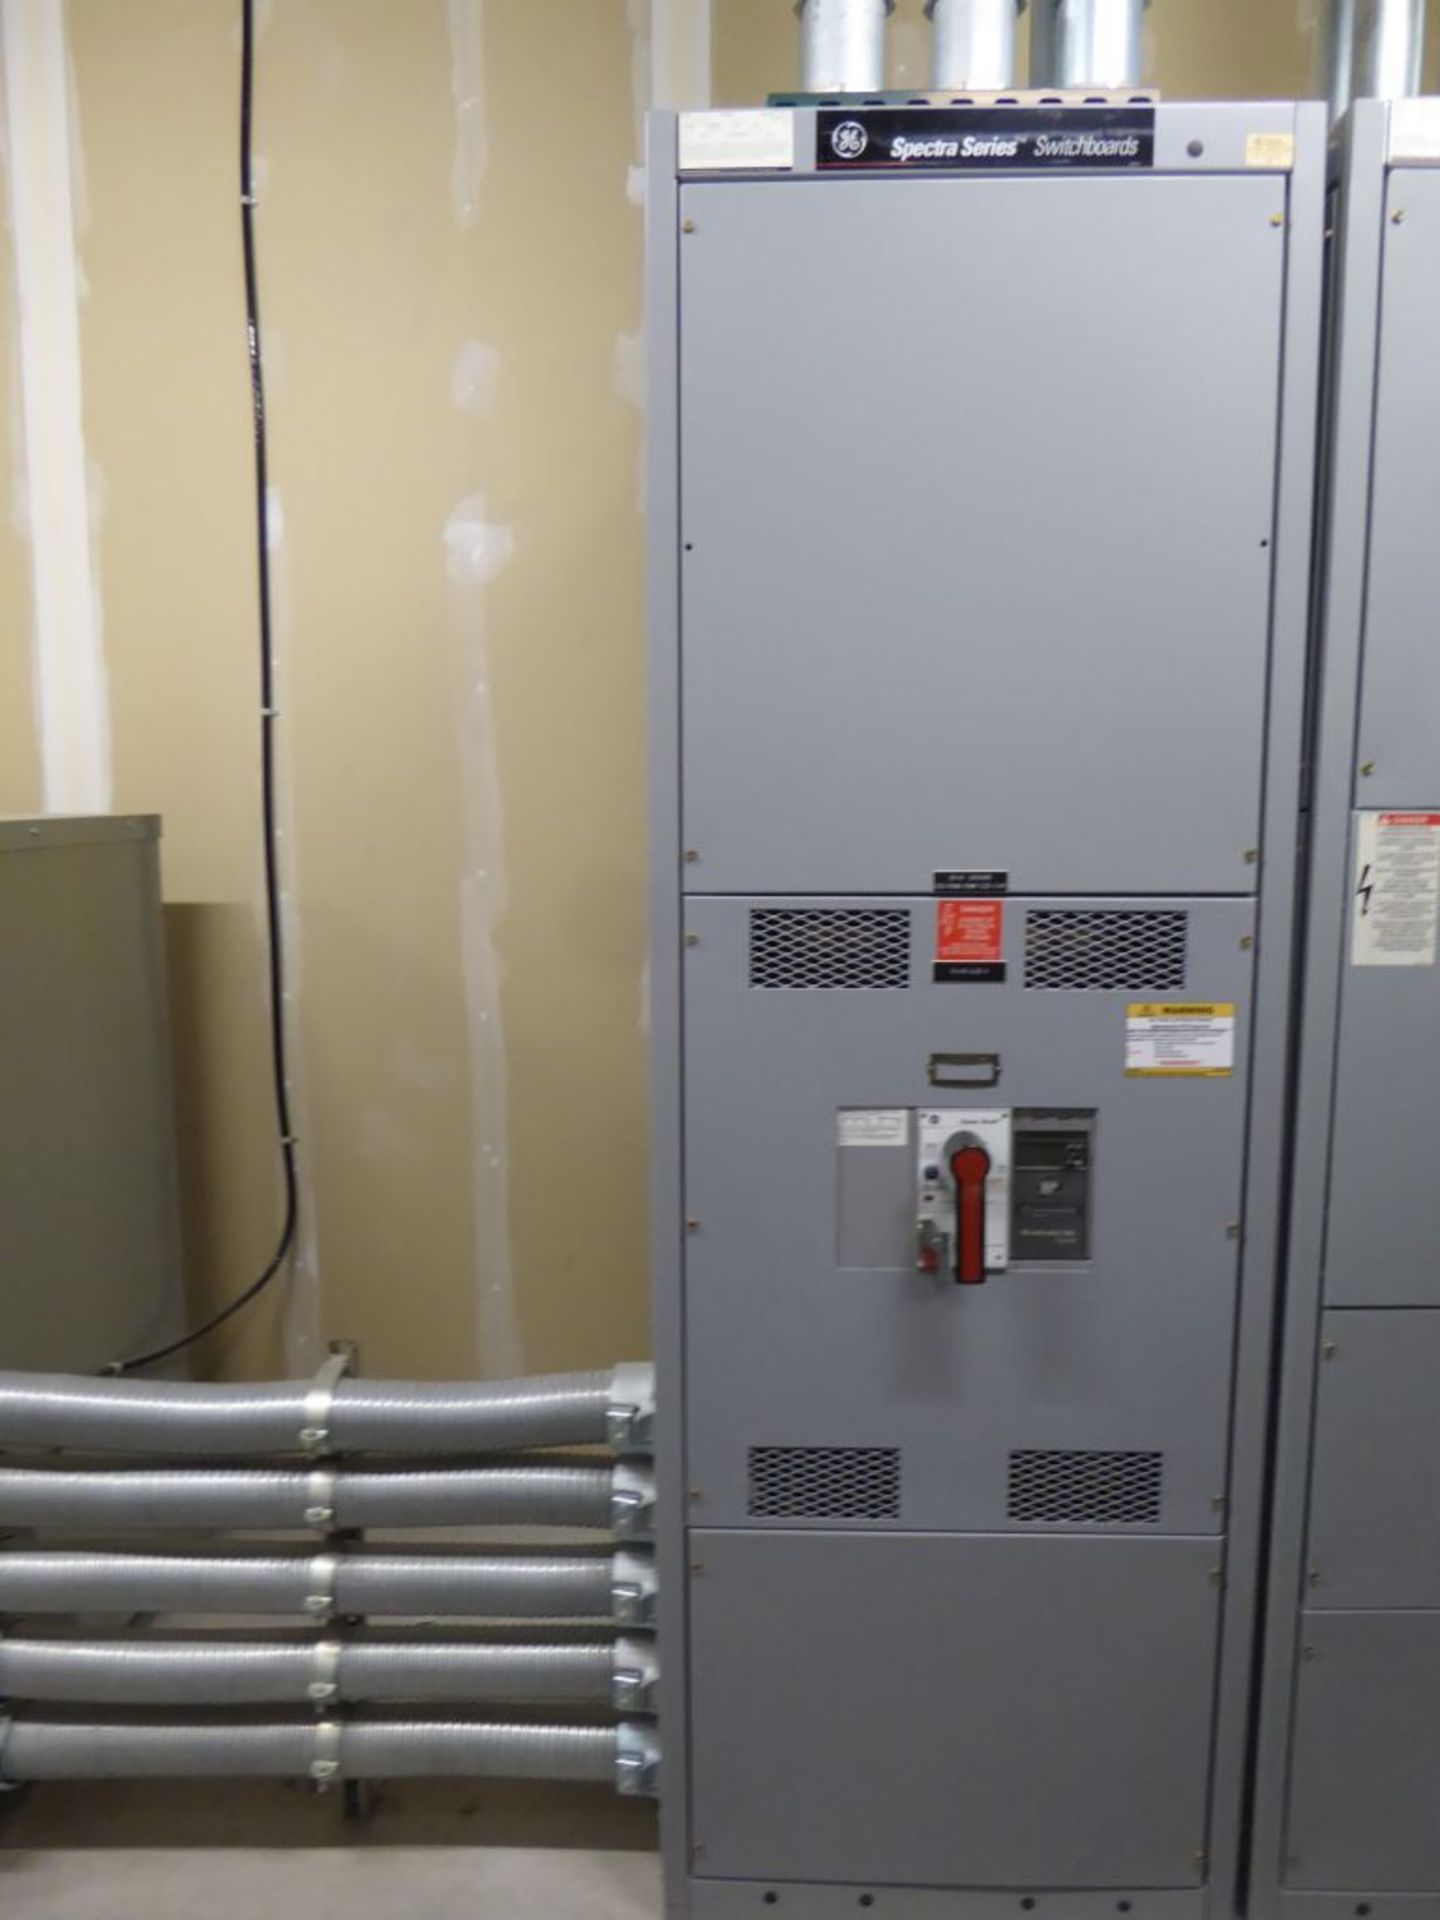 Spartanburg, SC - GE 1600A Spectra Series Switchboard - Image 2 of 6